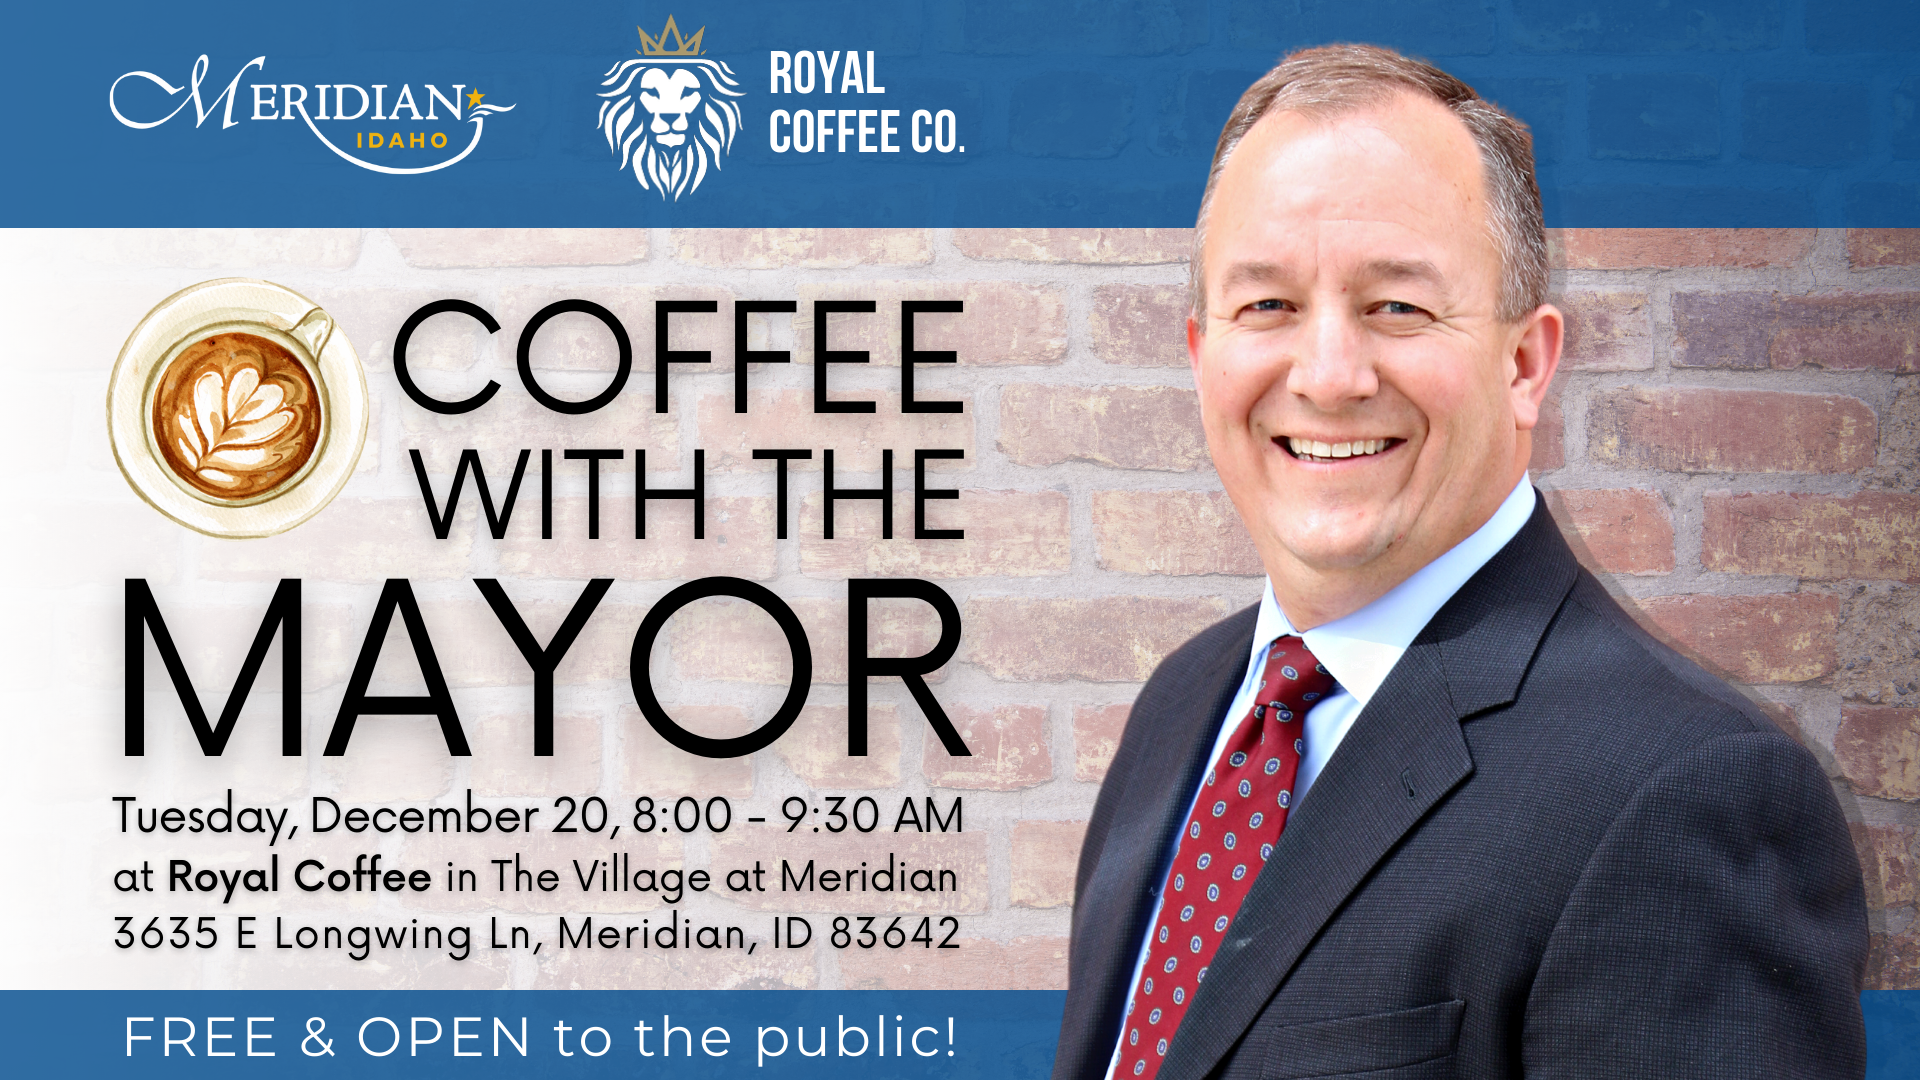 Graphic advertising the latest Coffee with the Mayor event. Top banner features the City of Meridian logo next to the Royal Coffee Company logo on a slightly transparent blue banner. A cutout of Mayor Simison features prominently in the right half of the image. On the left, a top-down picture of a coffee cup along with the text "Coffee with the Mayor". Below that, the text reads "Tuesday, December 20, 8:00 - 9:30 AM at Royal Coffee in The Village at Meridian 3635 E Longwing Ln, Meridian, ID 83642". Below that, a smaller banner reads: "FREE & OPEN to the public!"